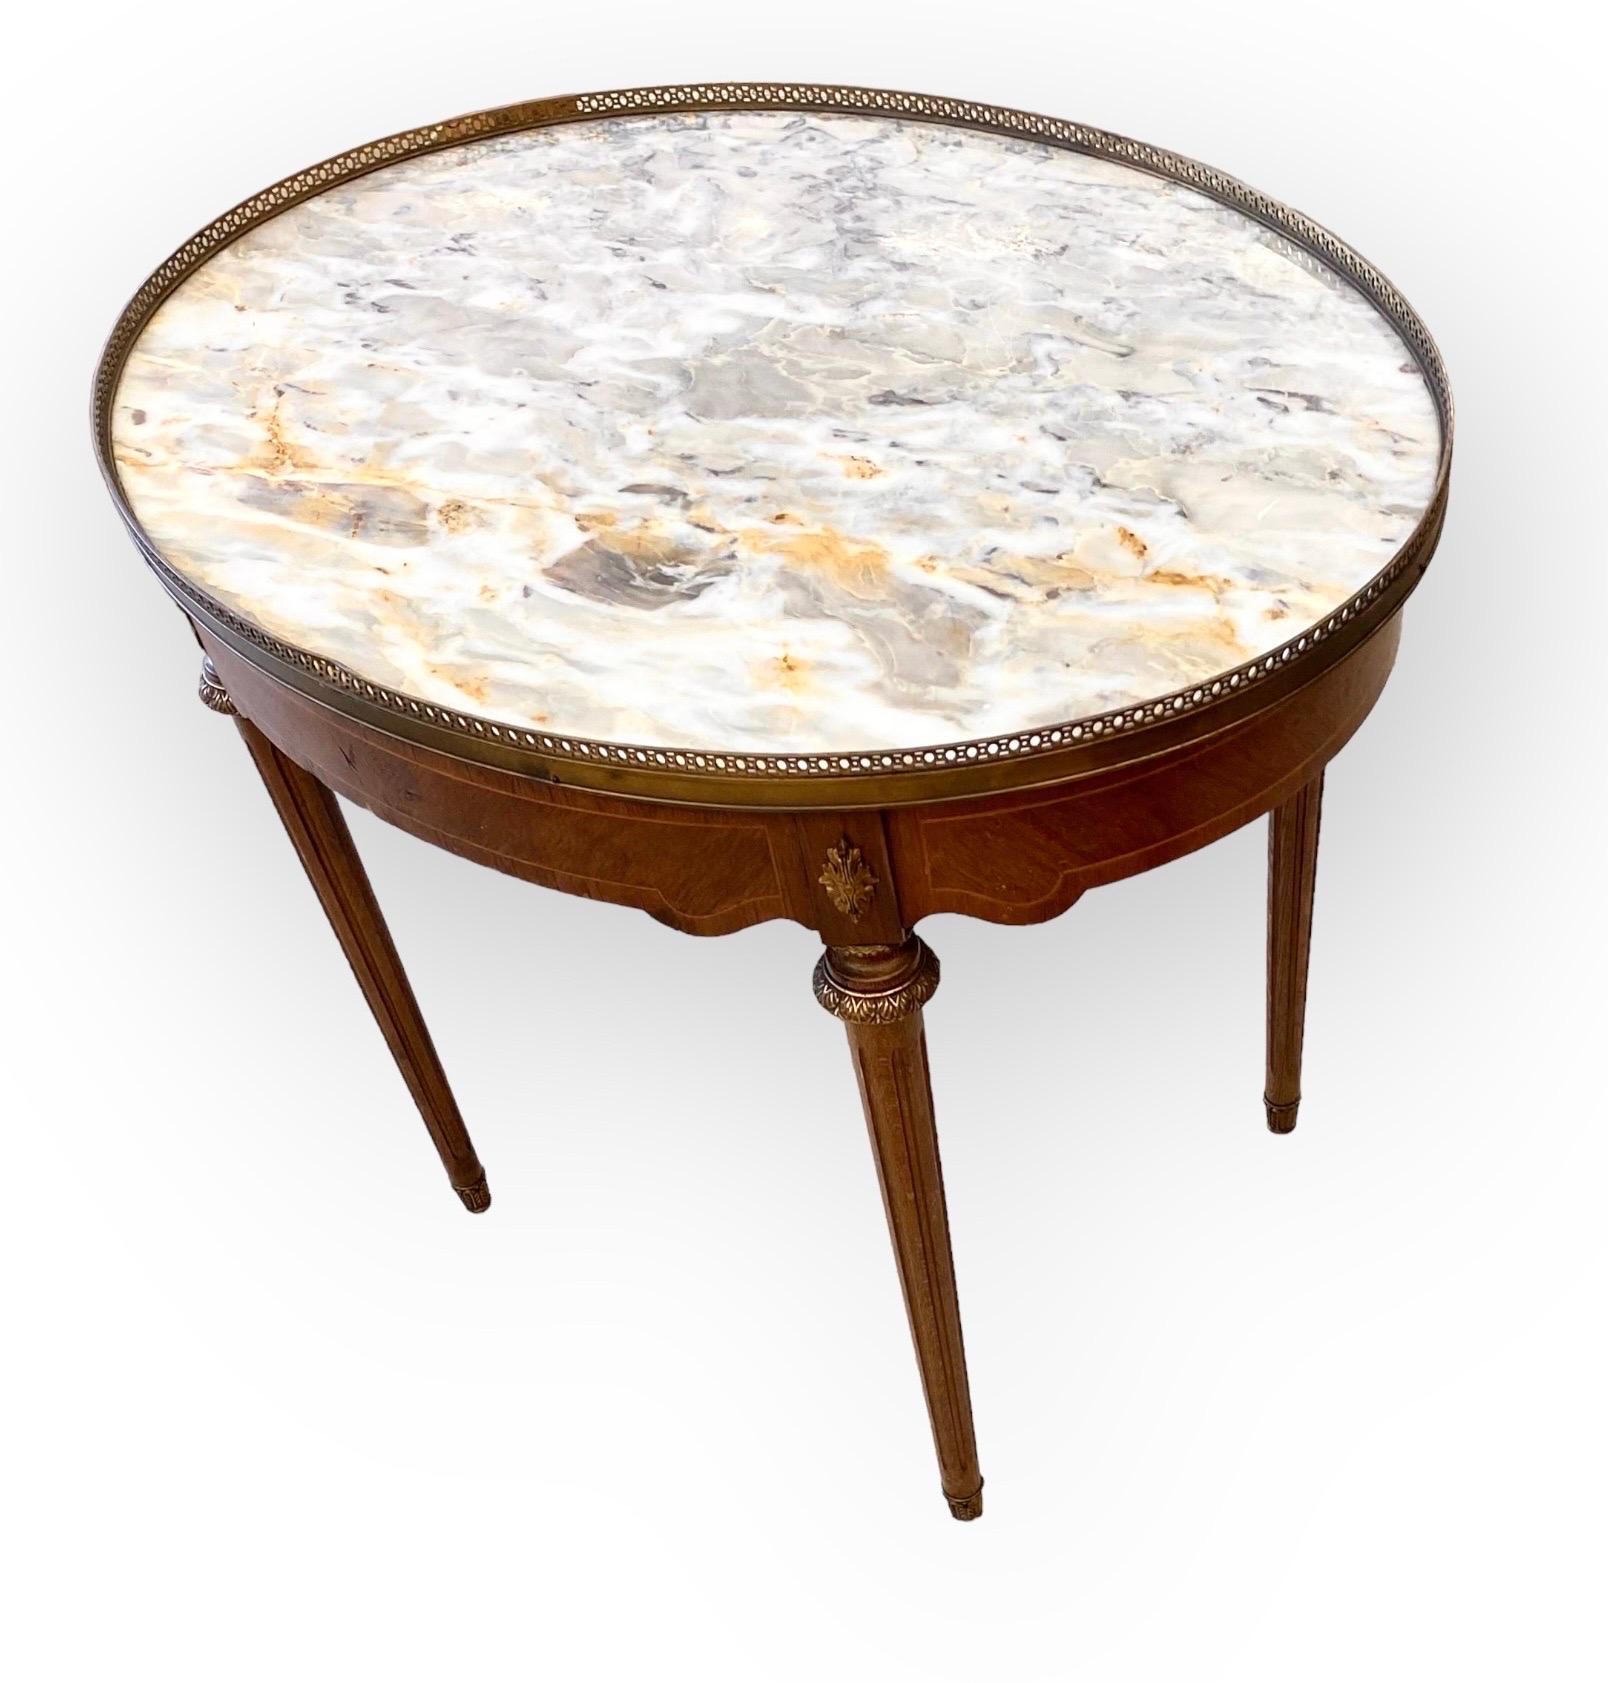 French Louis XVI Style Inlaid Carved Walnut Marble Top Bouillote Table, 20th C.  For Sale 2